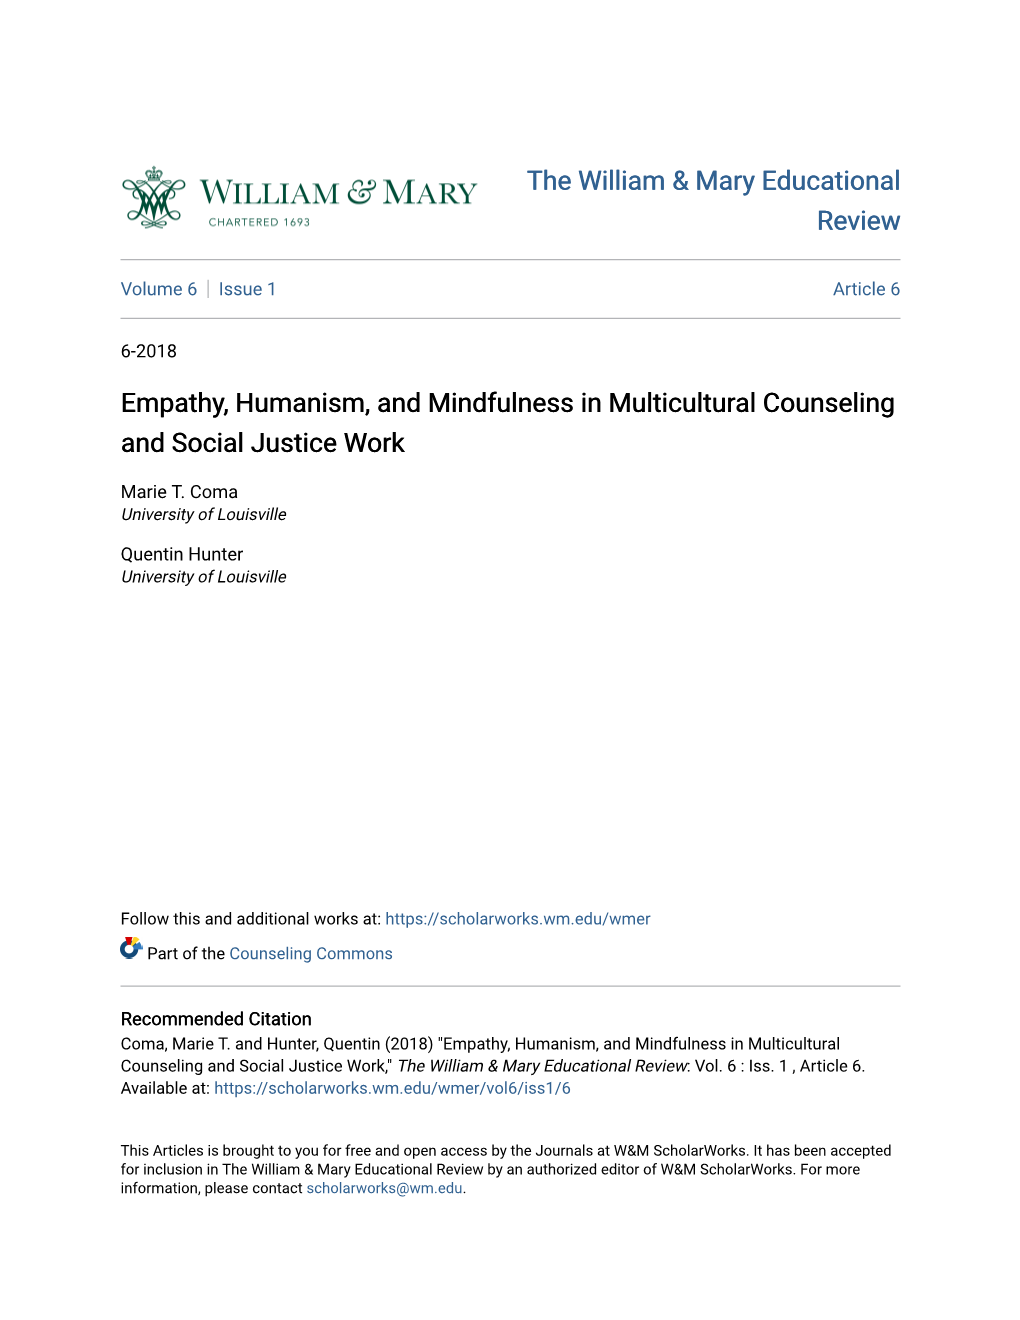 Empathy, Humanism, and Mindfulness in Multicultural Counseling and Social Justice Work